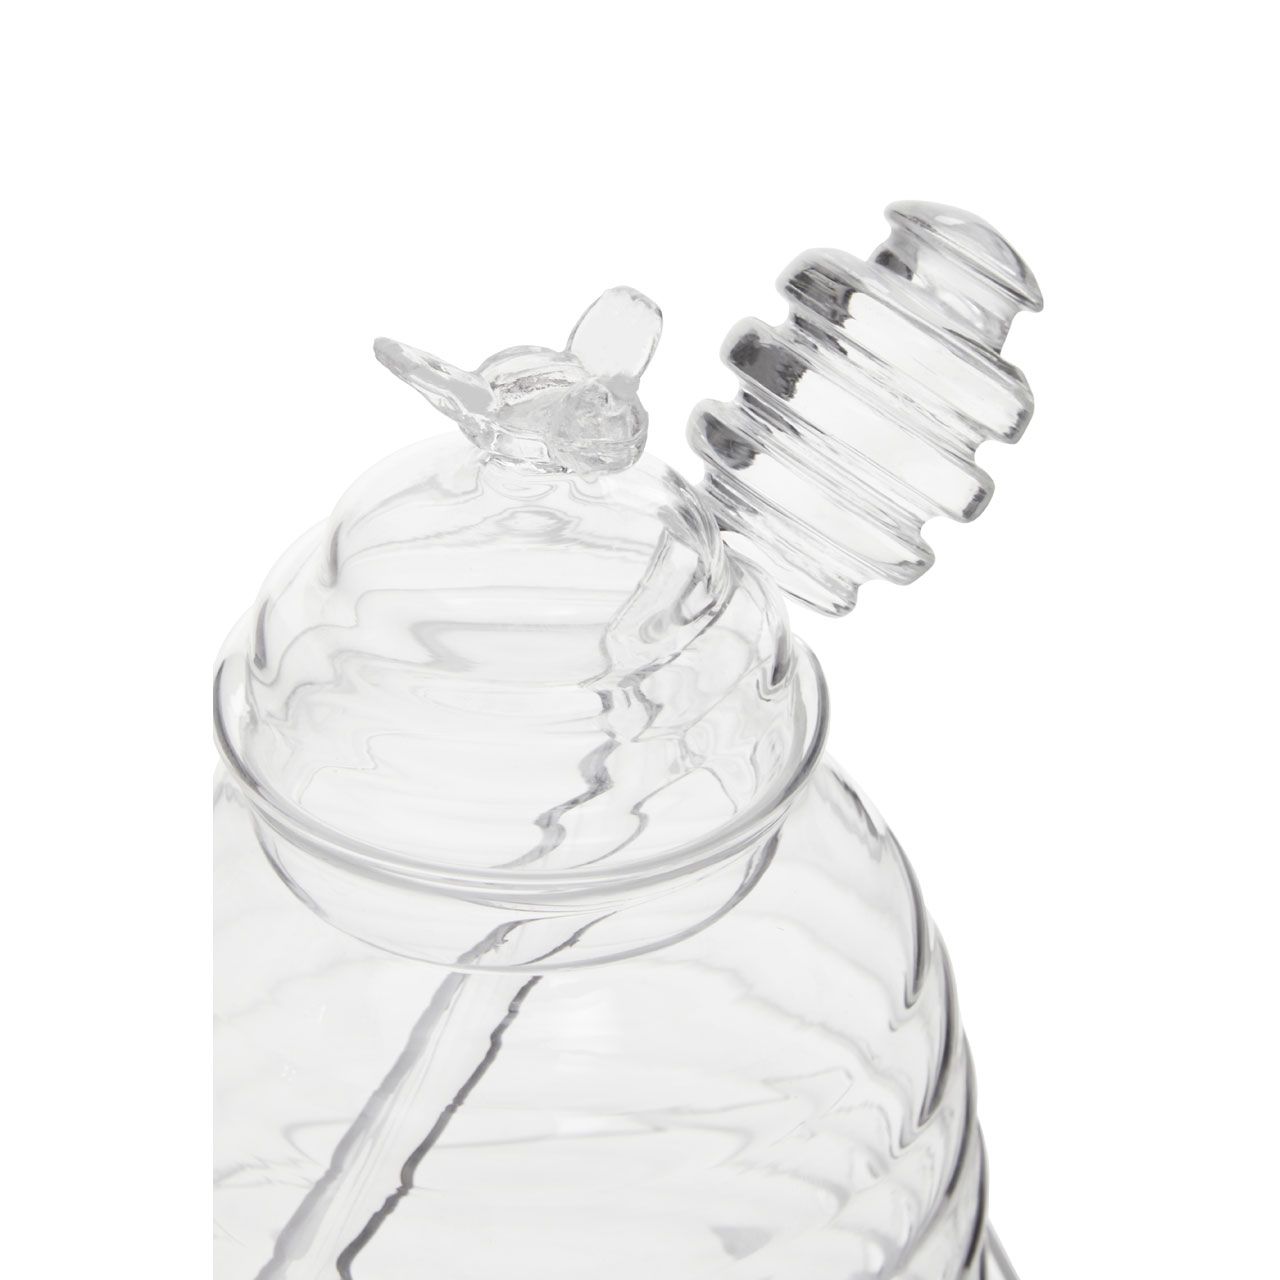 Glass Honey Jar With Dipper - 